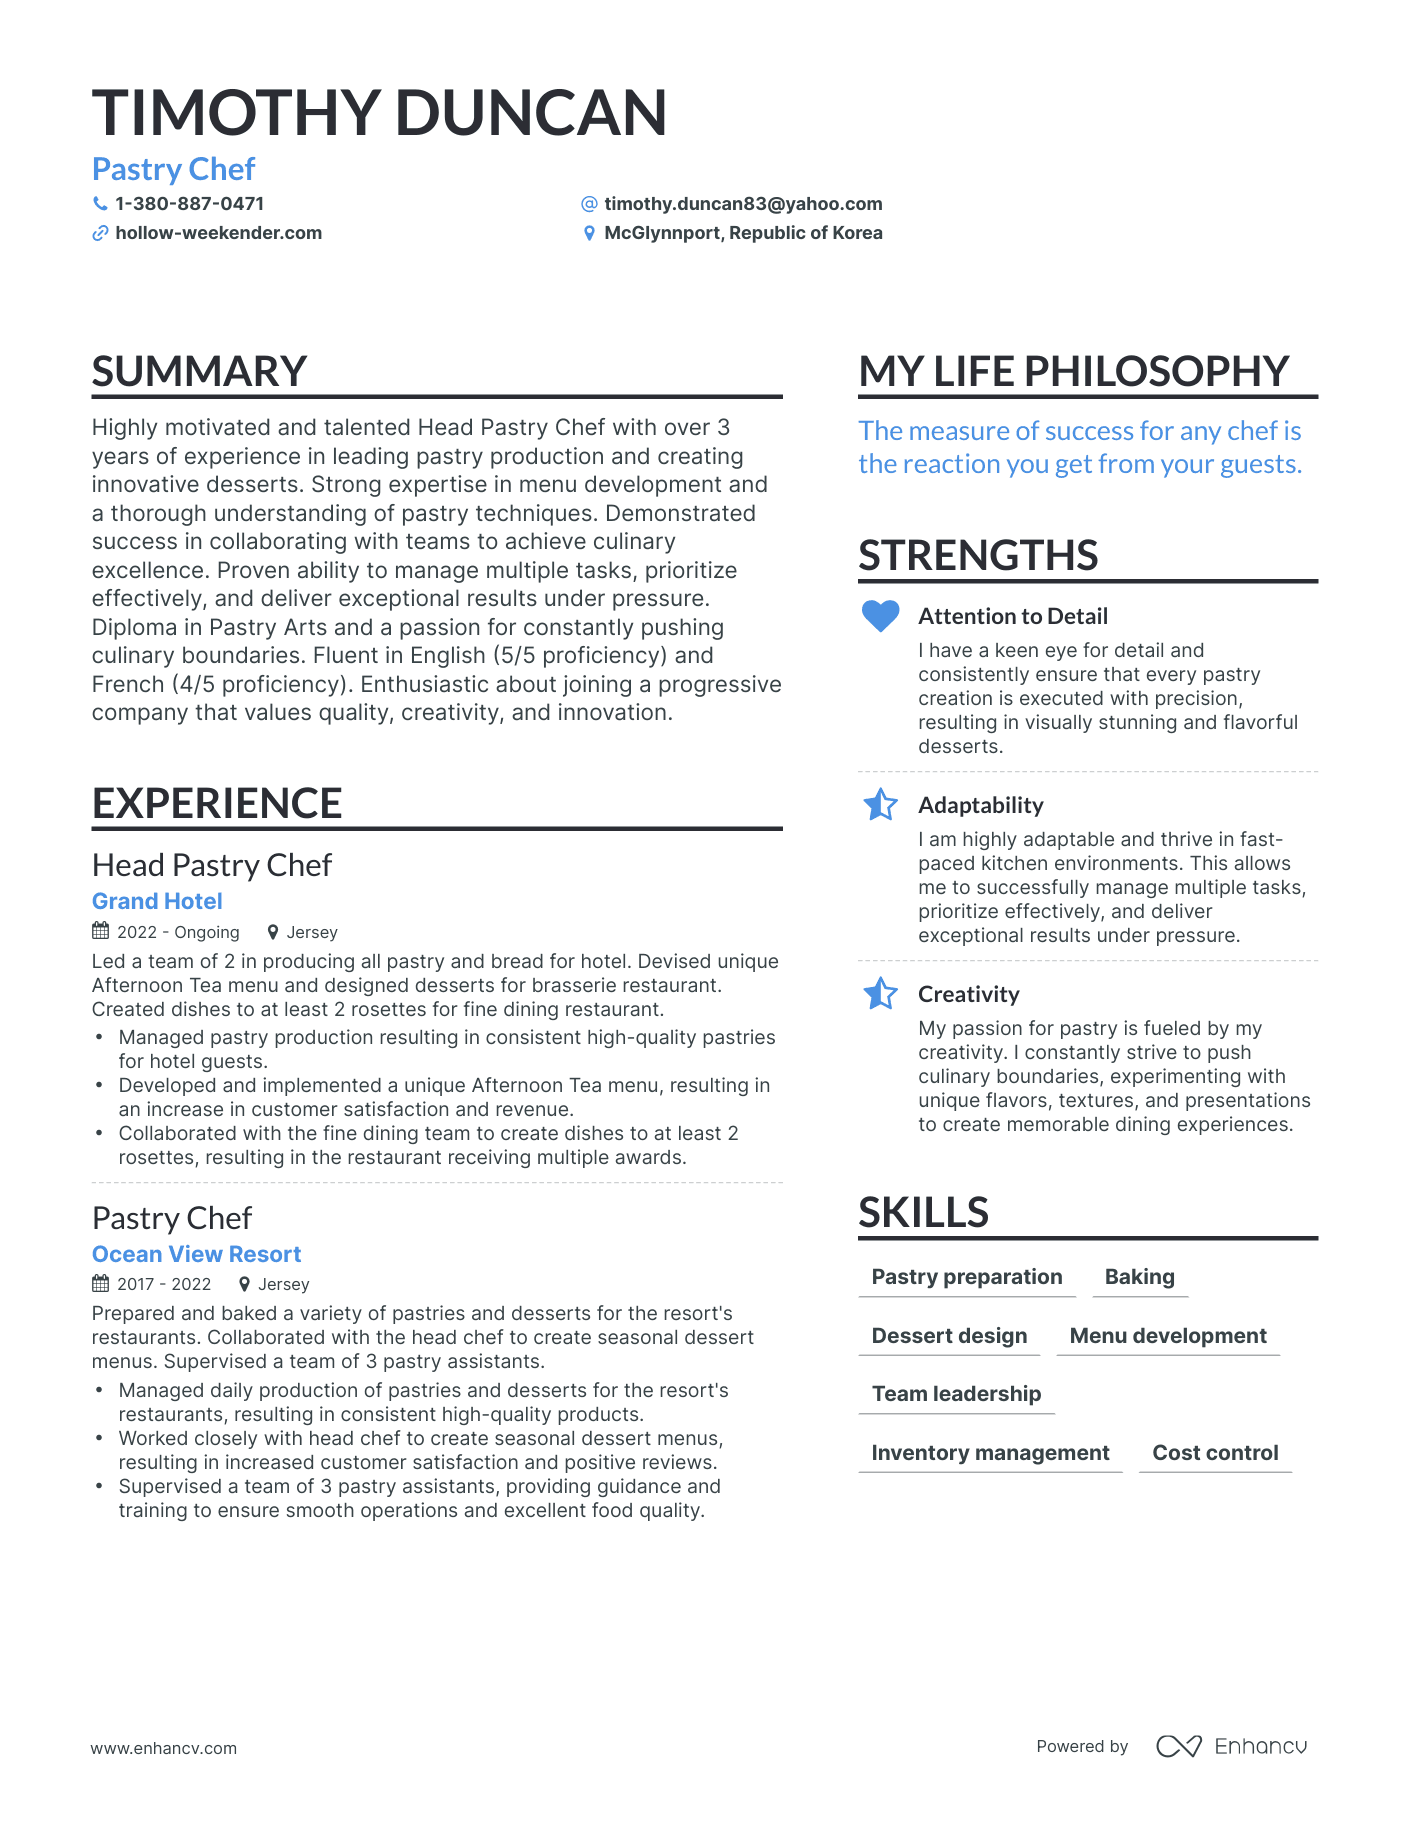 Pastry Chef resume example